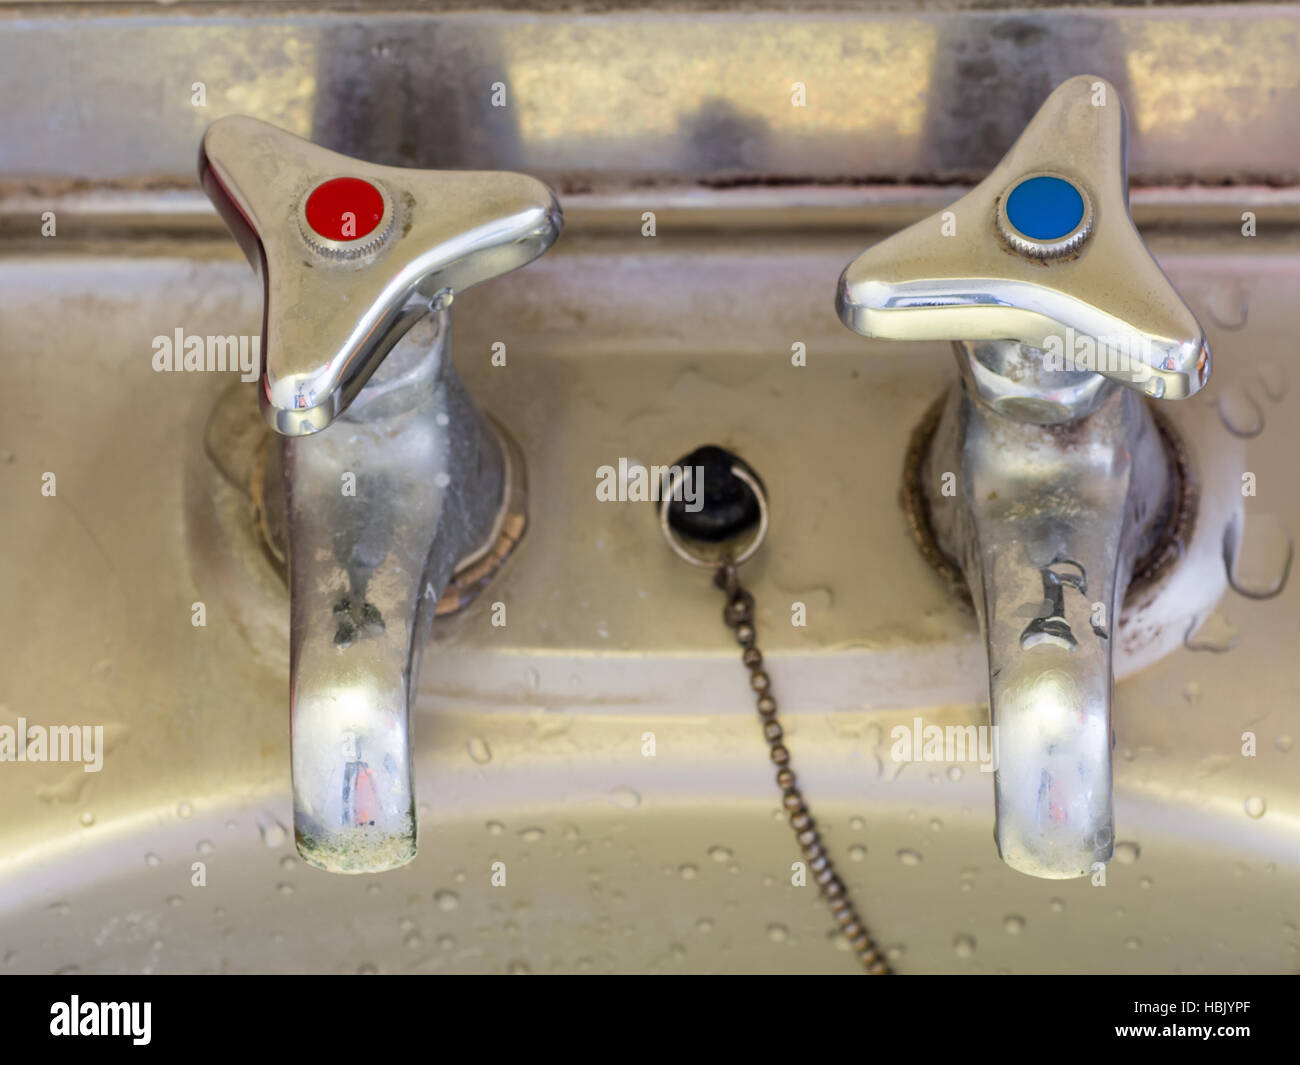 Japanese retro hot water tap with a red mark and cold water tap with a blue mark Stock Photo